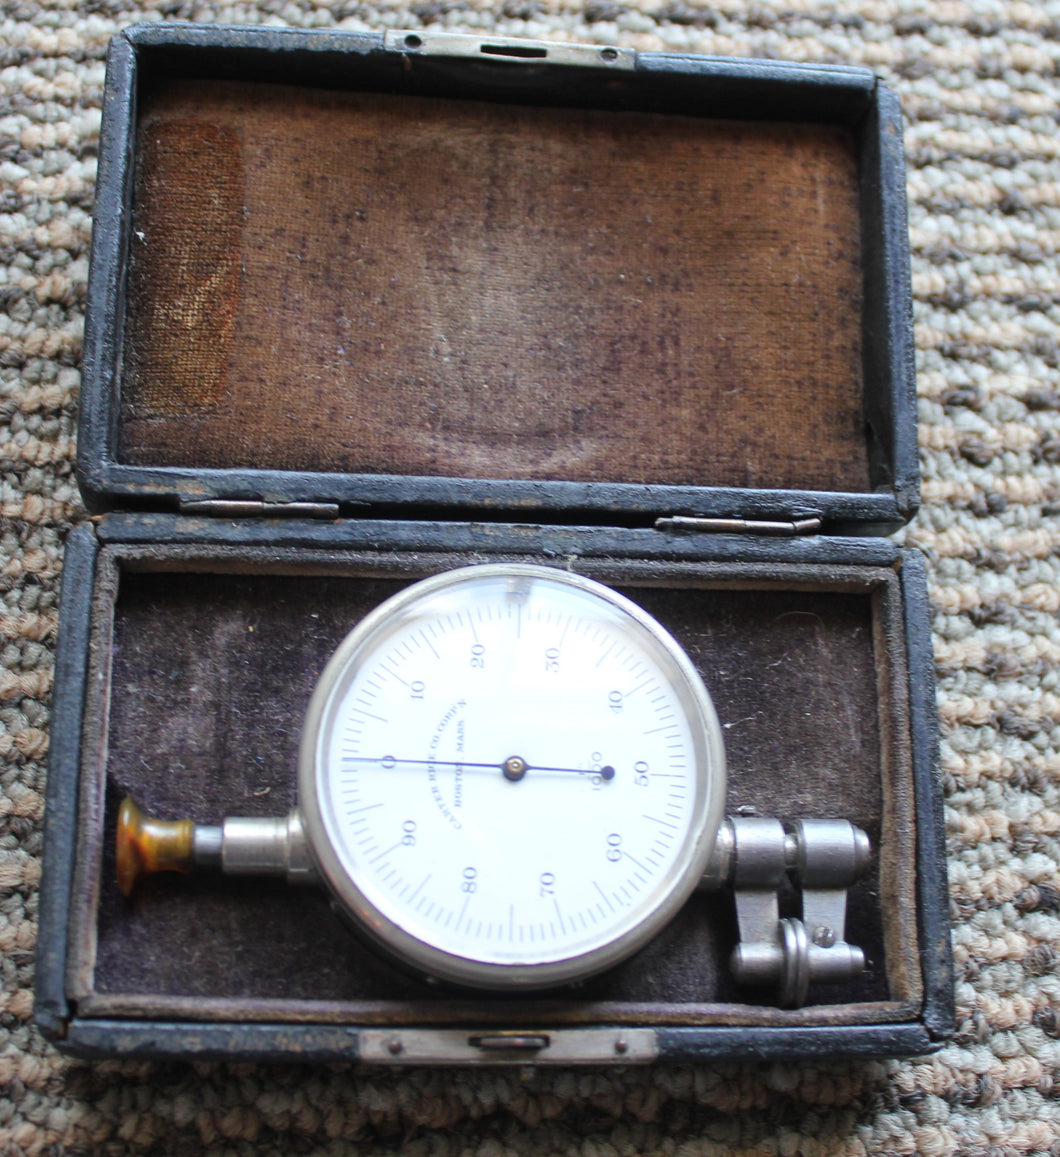 Vintage PRECISION DIAL READ PAPER GAUGE MICROMETER by the Carter Rice Company Boston